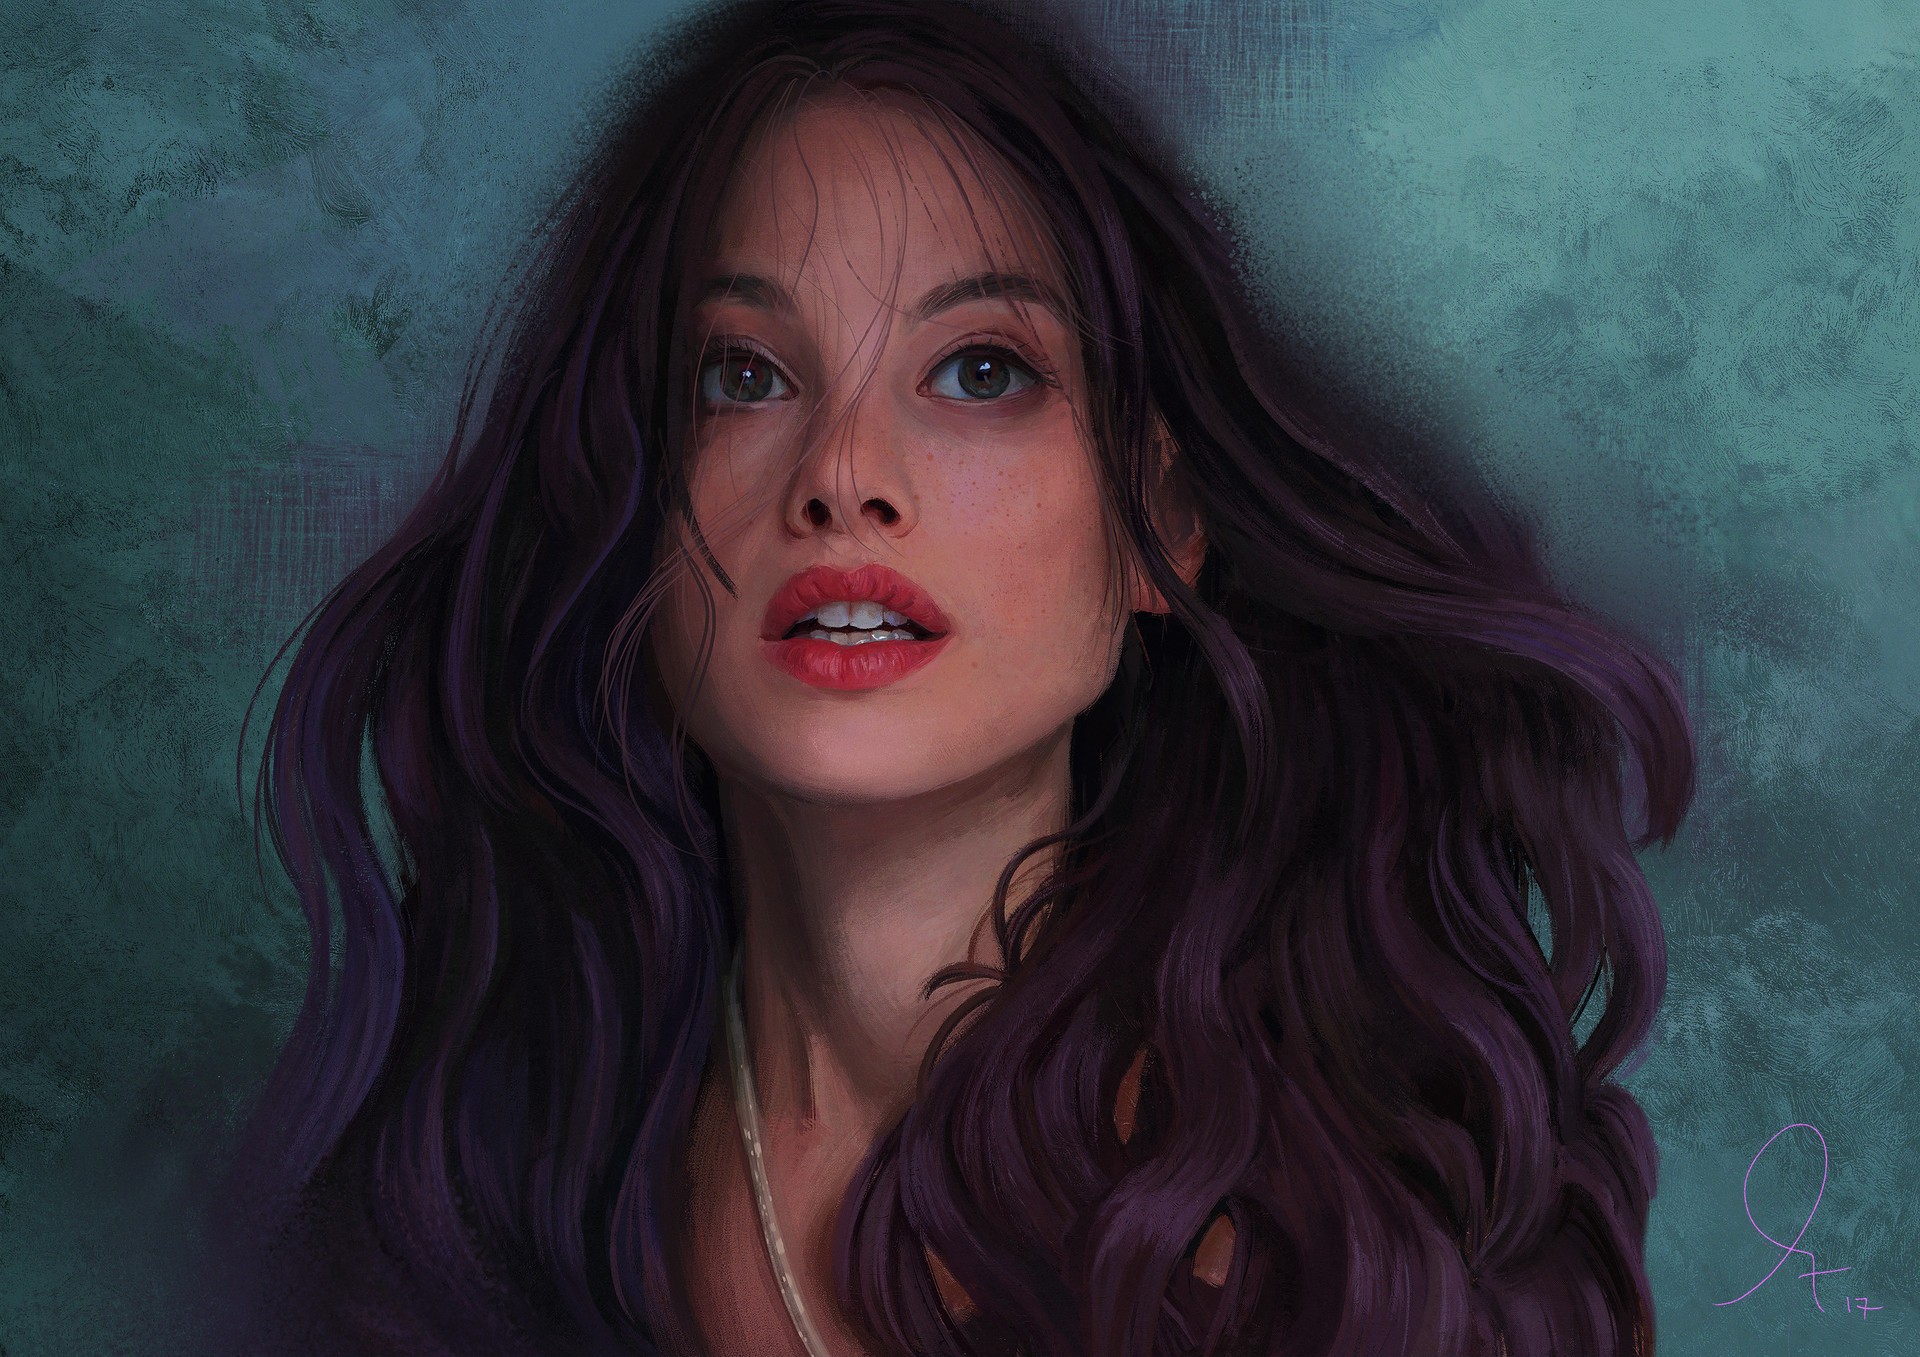 Painting of a Woman by Mandy Jurgens